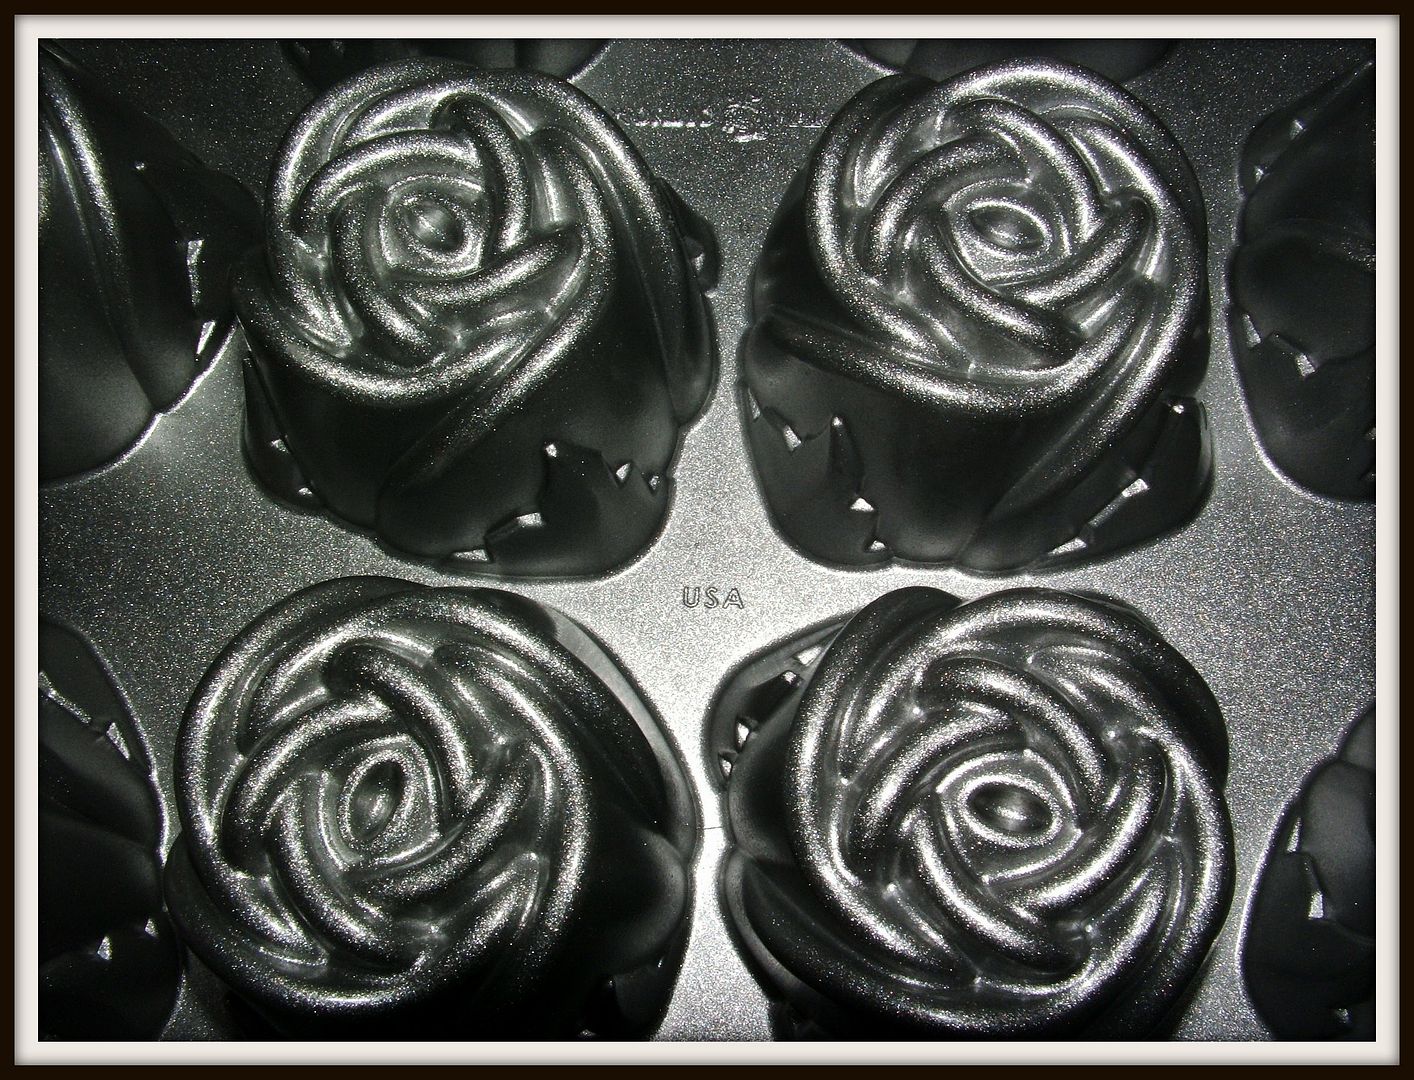 Rose Bud Cake Pan by Angie Ouellette-Tower for godsgrowinggarden.com photo 015_zps809ff19d.jpg